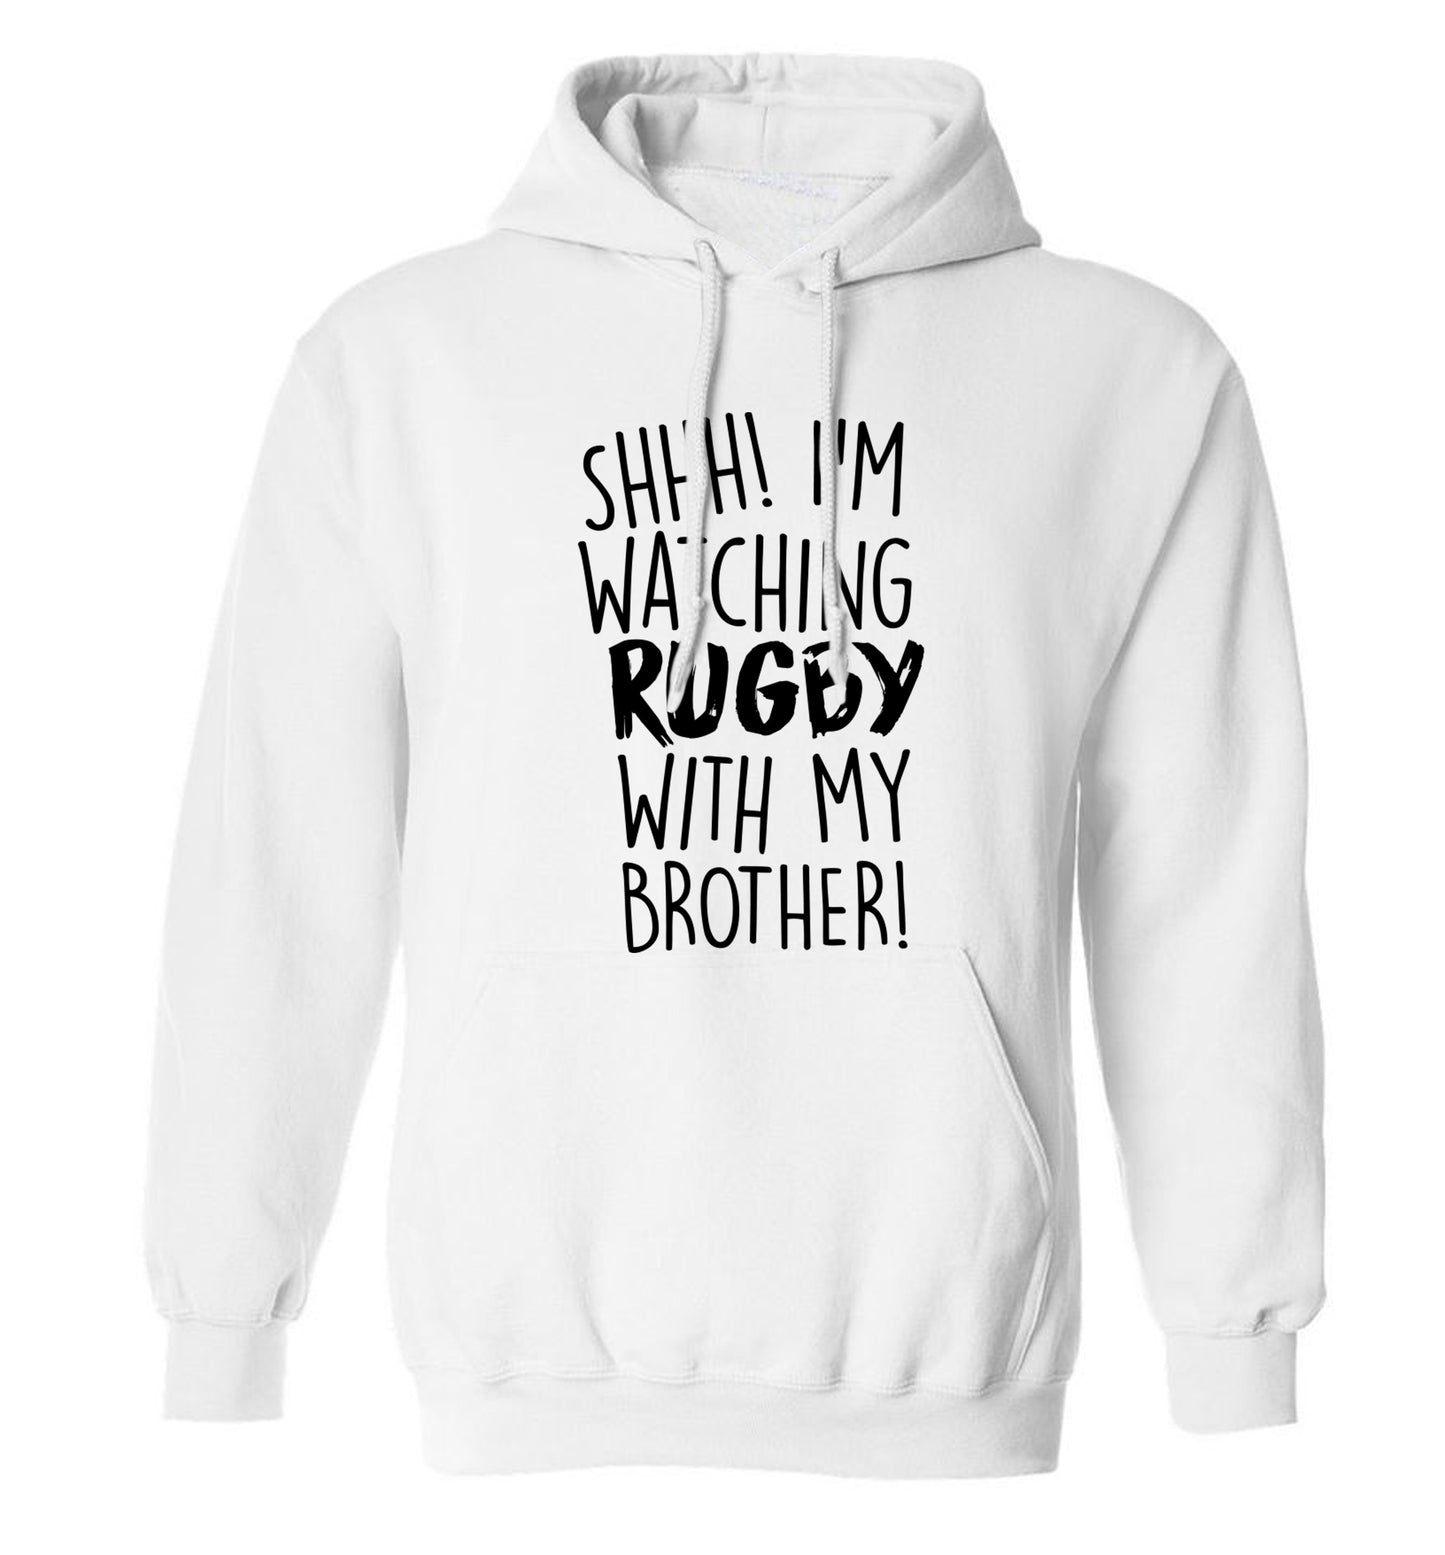 Shh... I'm watching rugby with my brother adults unisex white hoodie 2XL